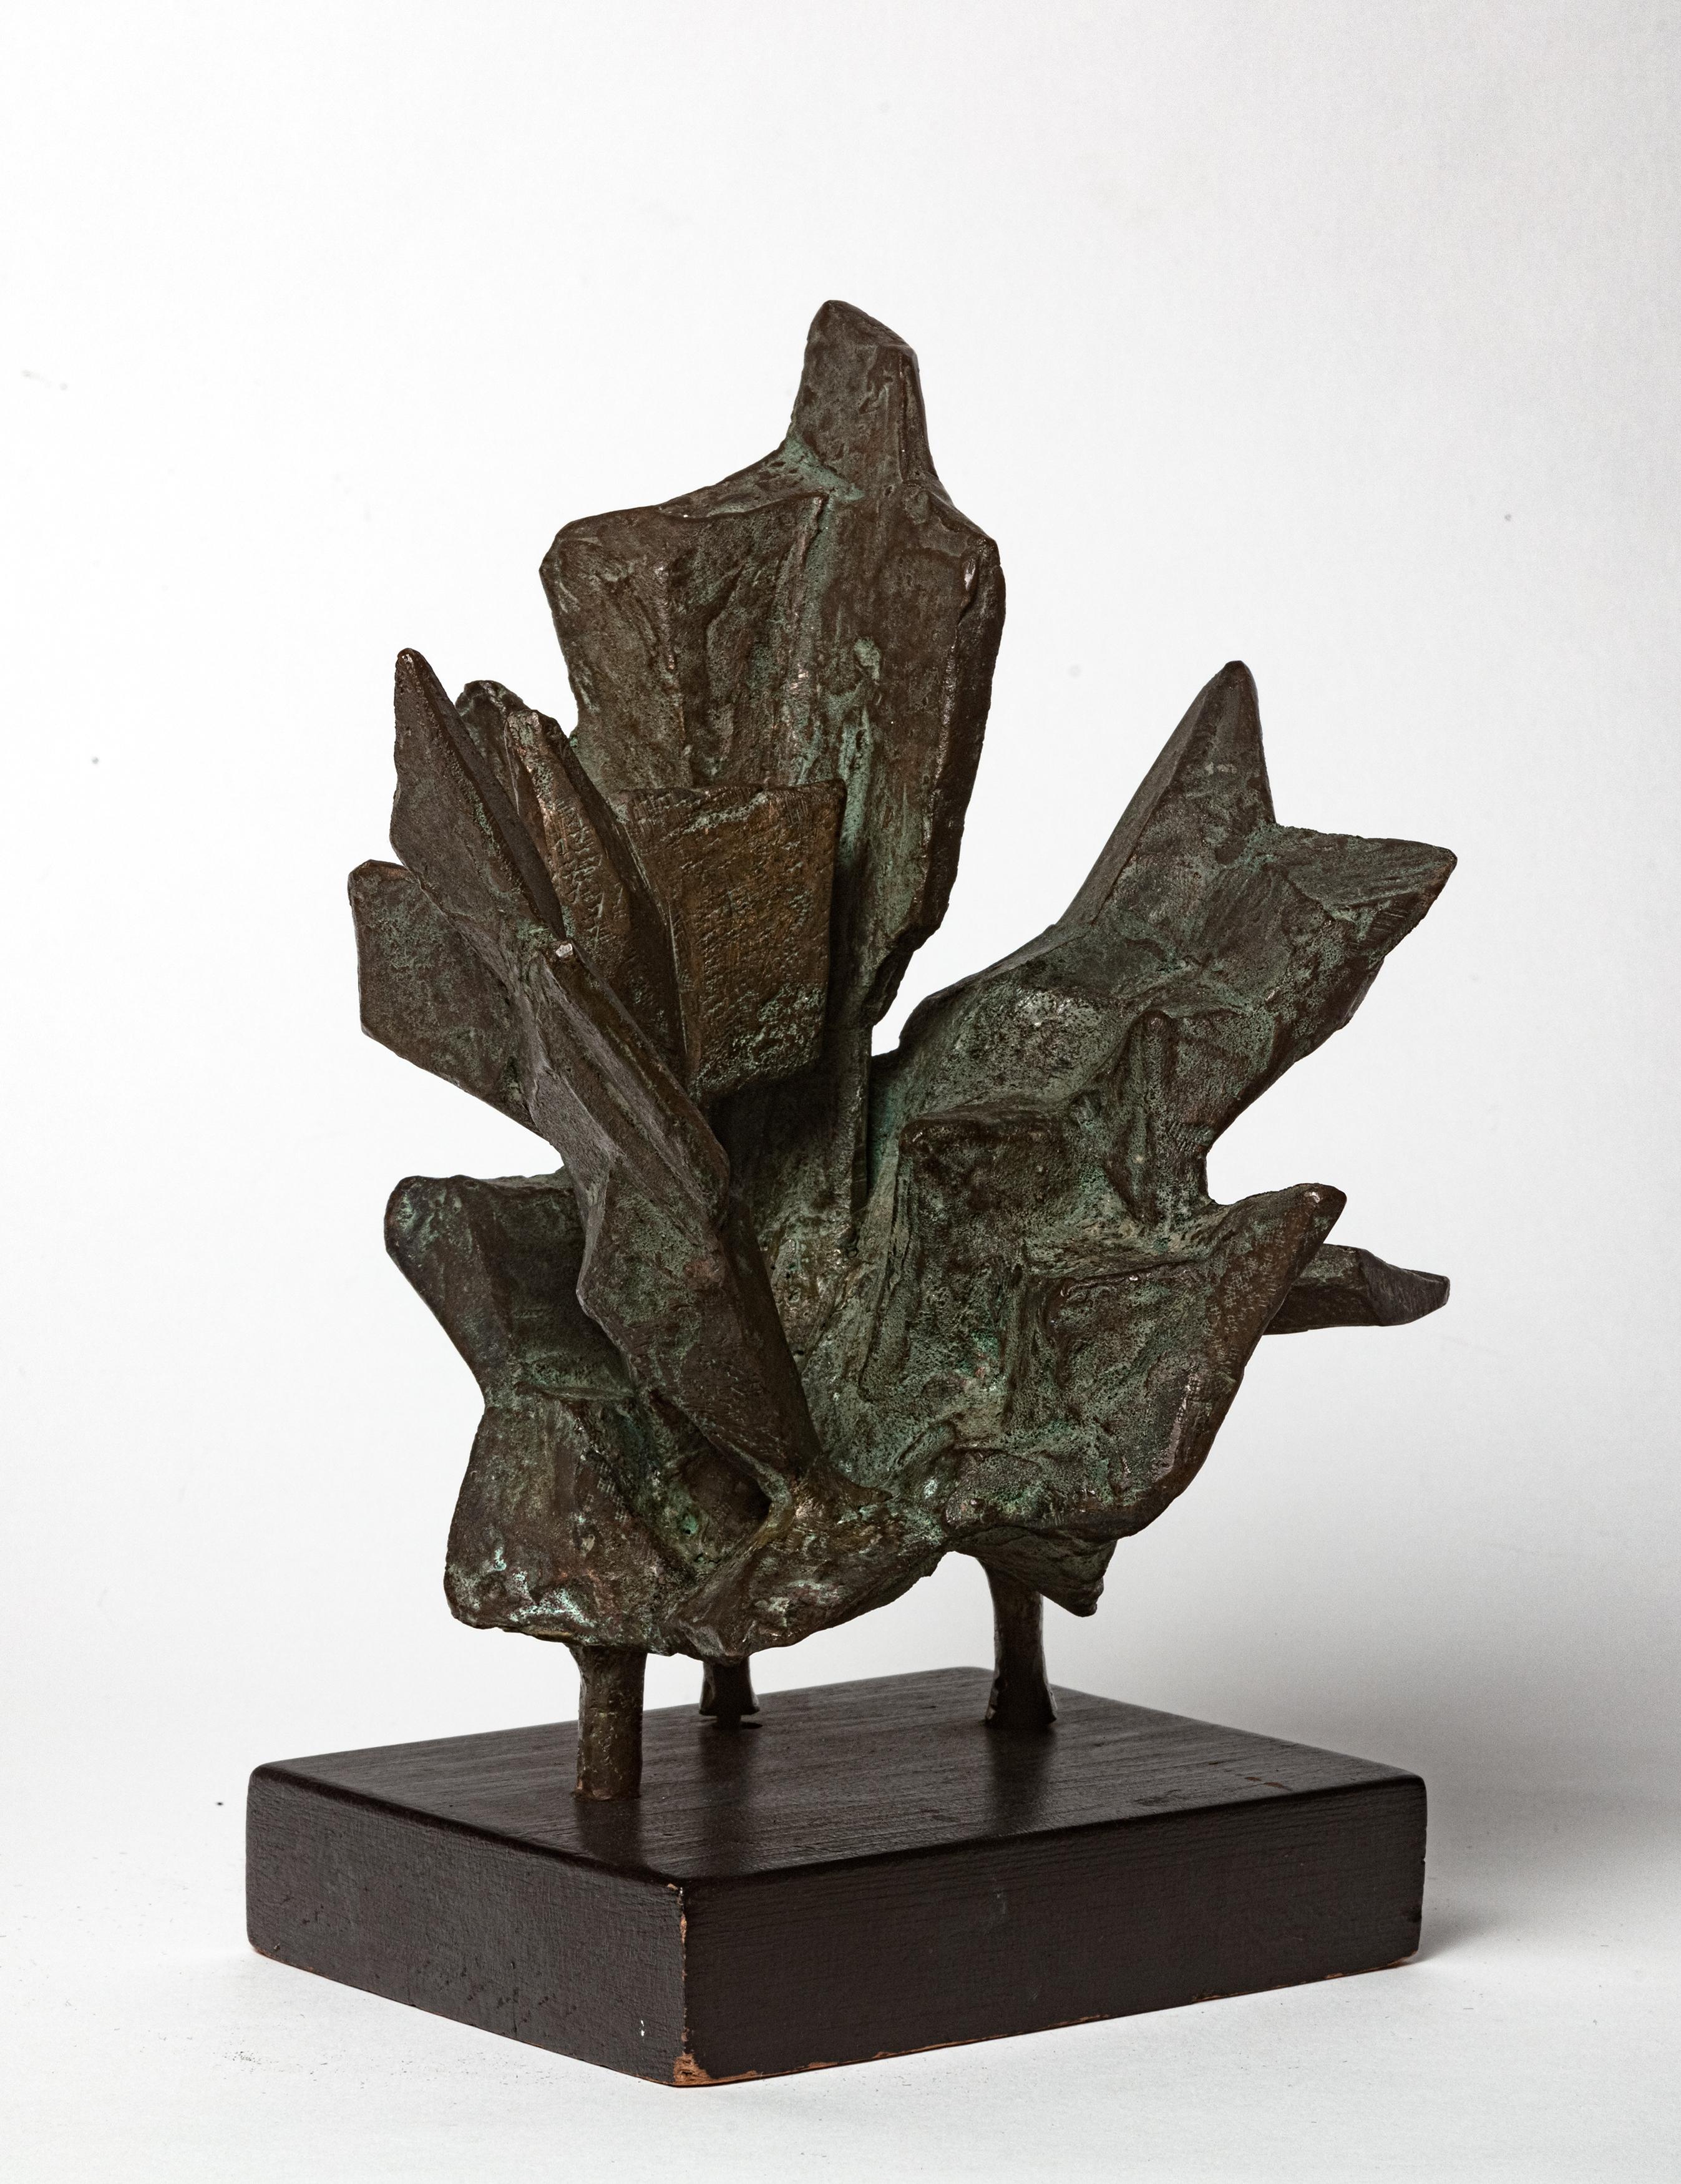 Untitled - Sculpture by Lin Emery